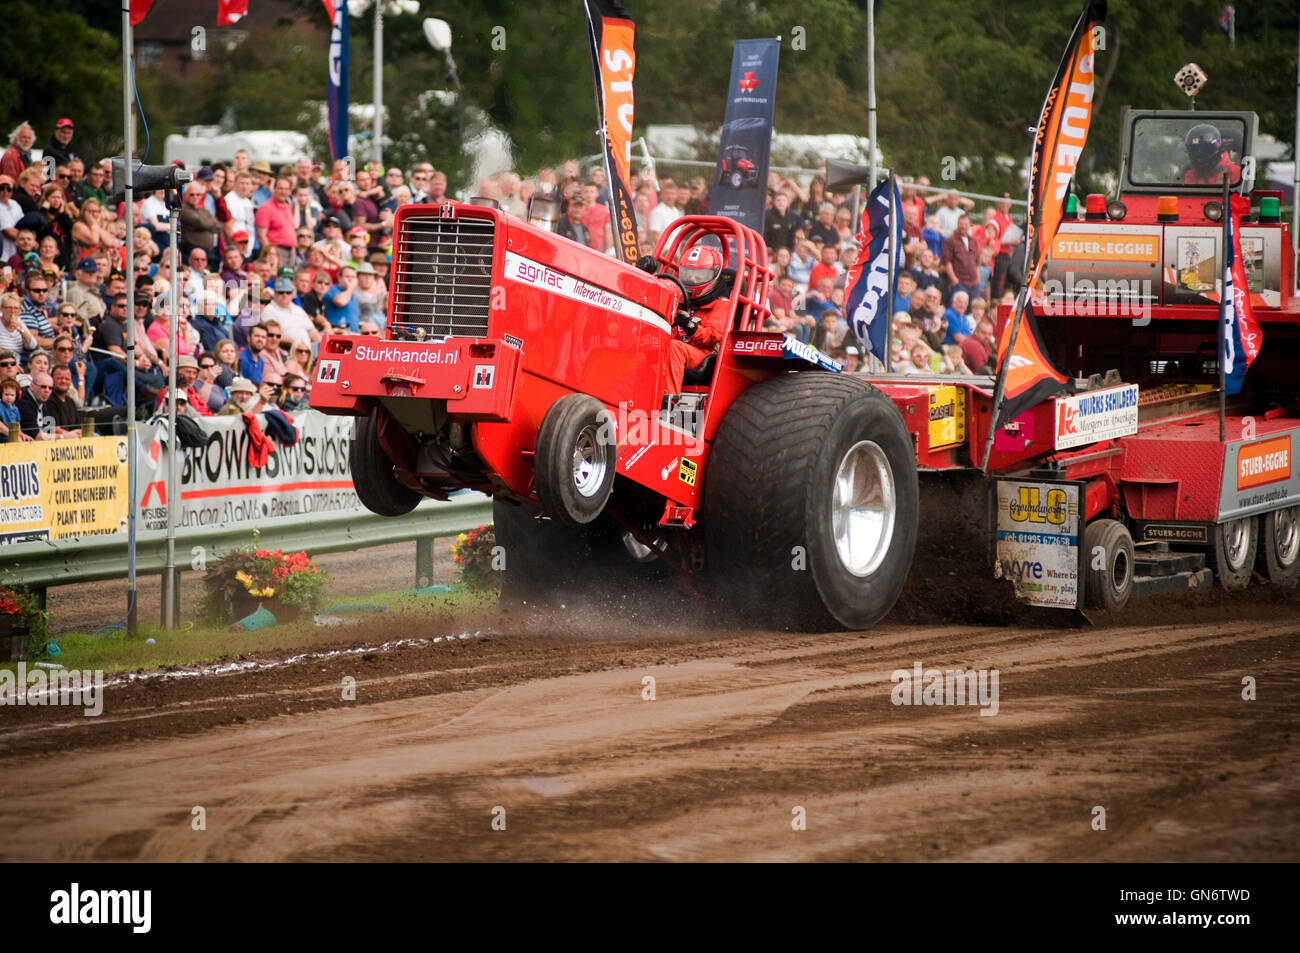 Super Stock tractor puller goes out of bounds during a pull Stock Photo